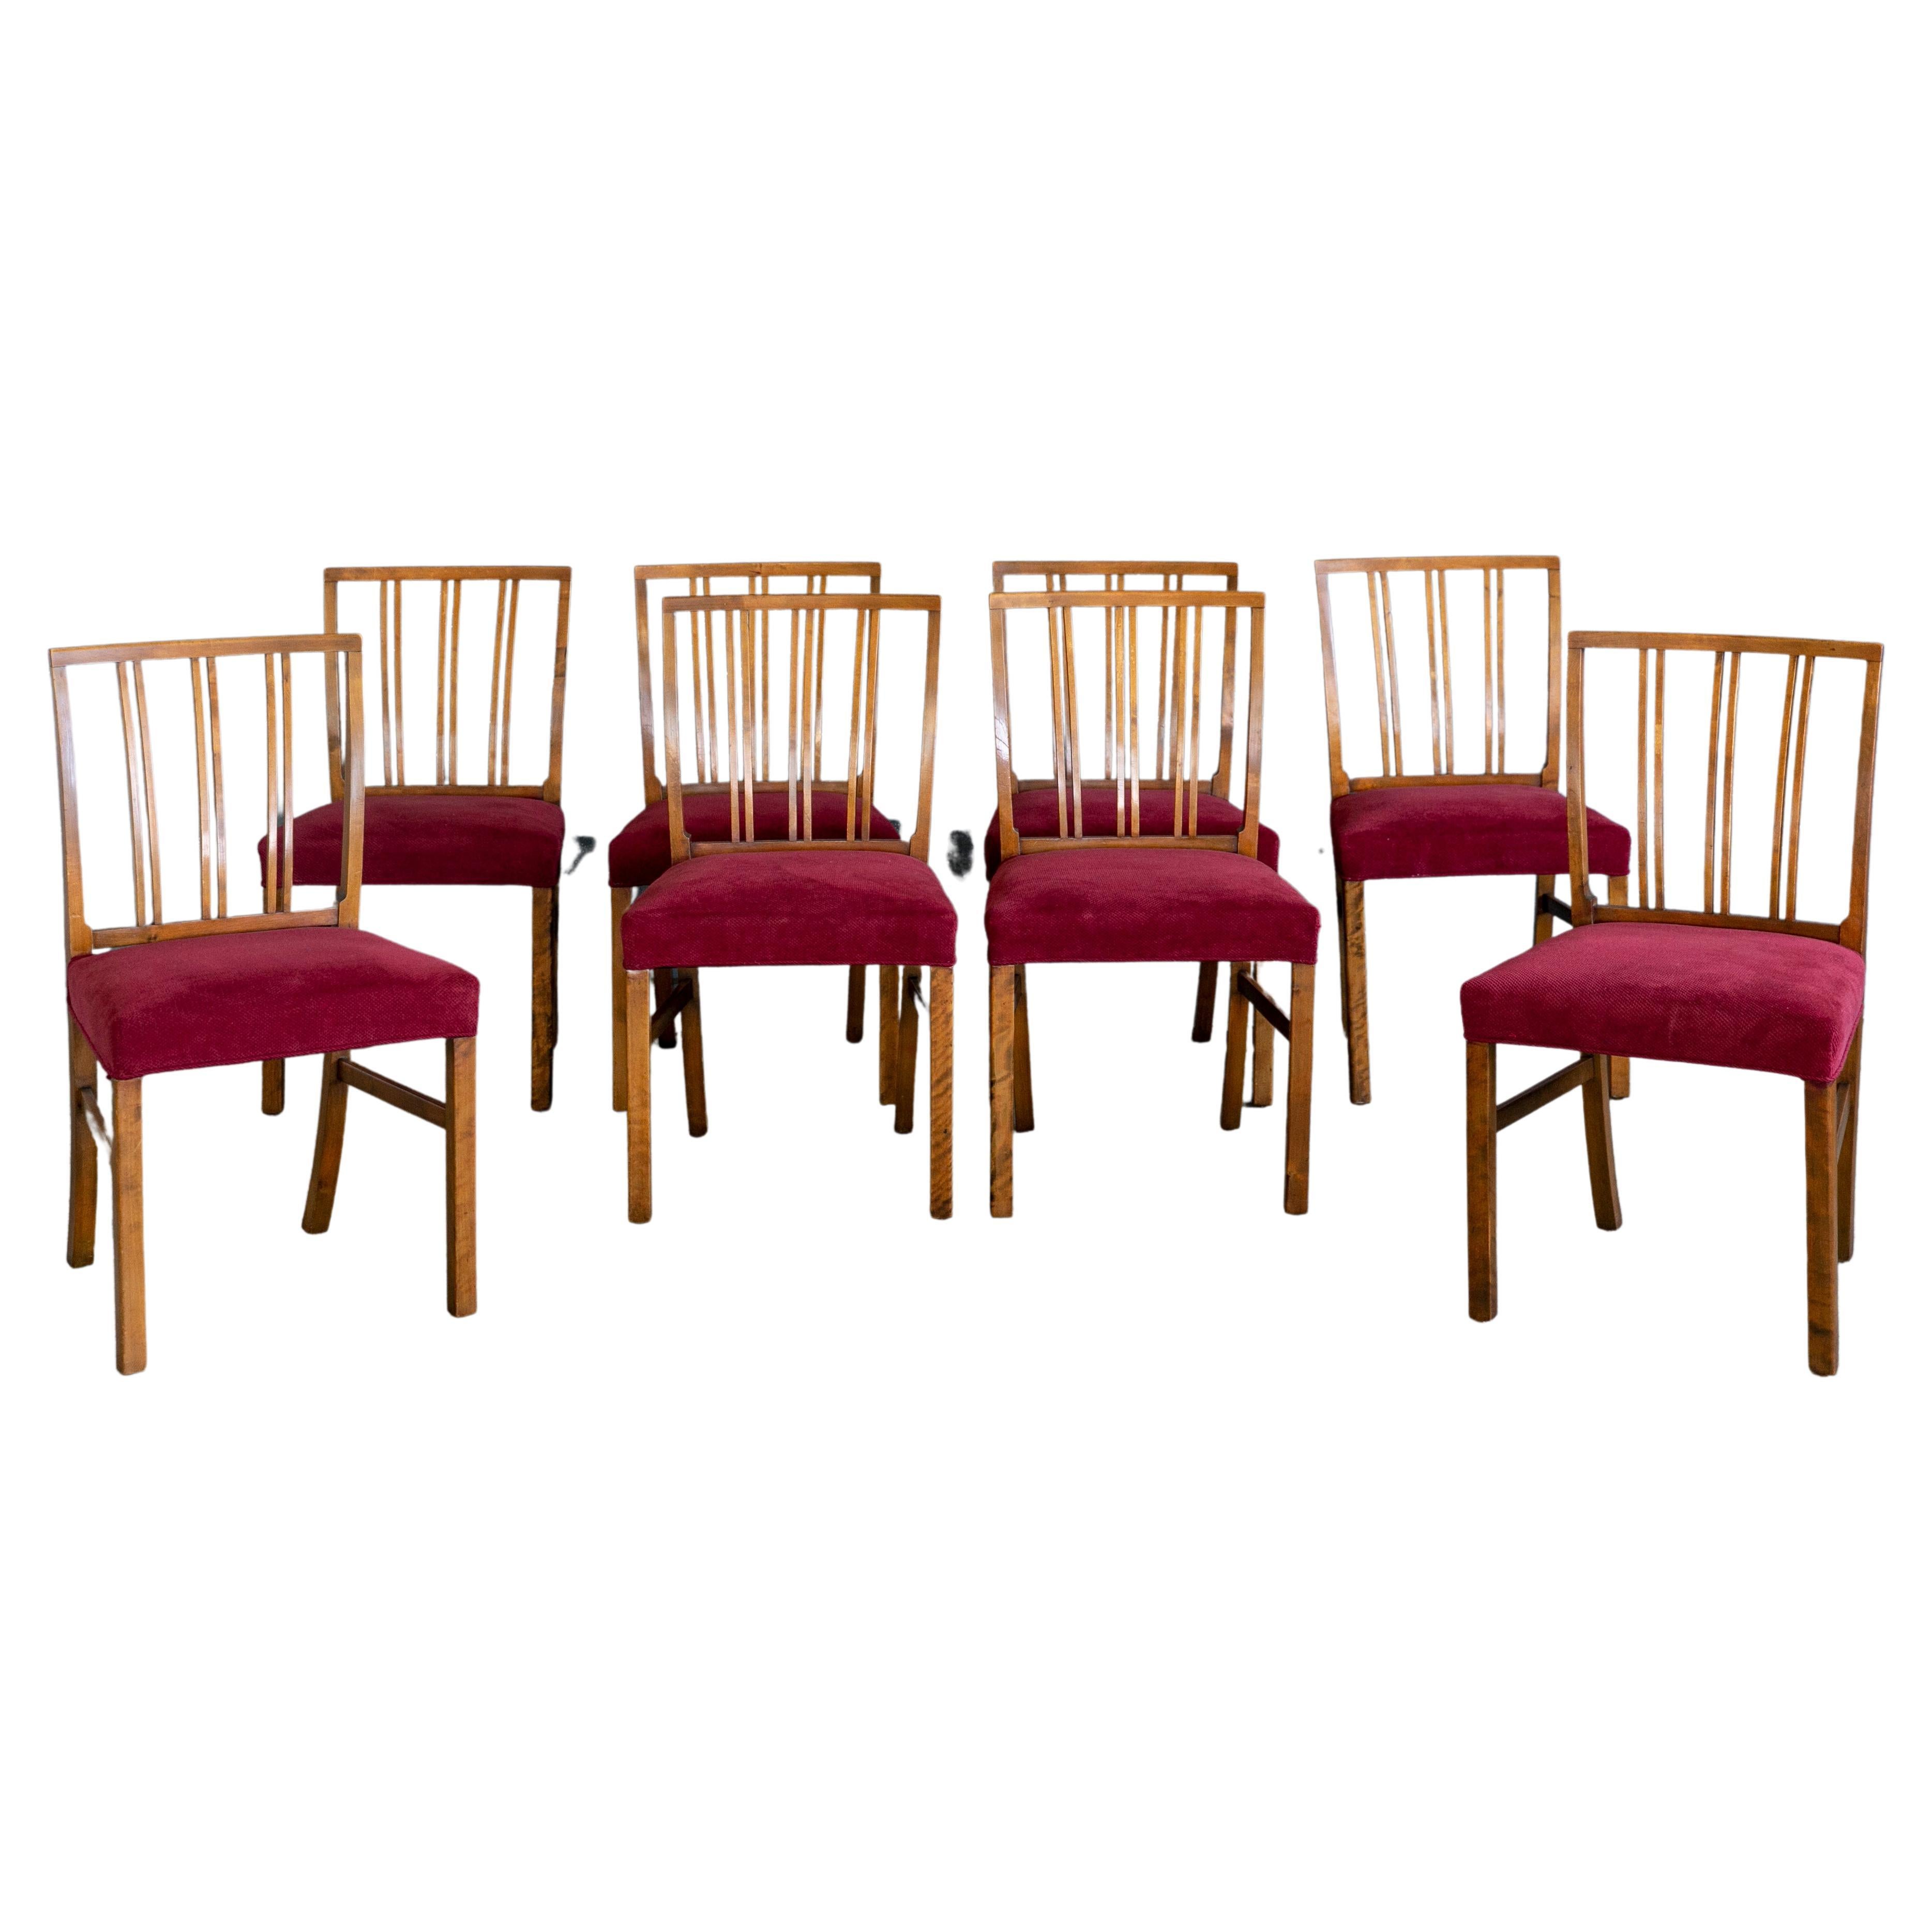 Set of 8 Danish Dining Chairs in Walnut by Th Schmidt 1940's For Sale